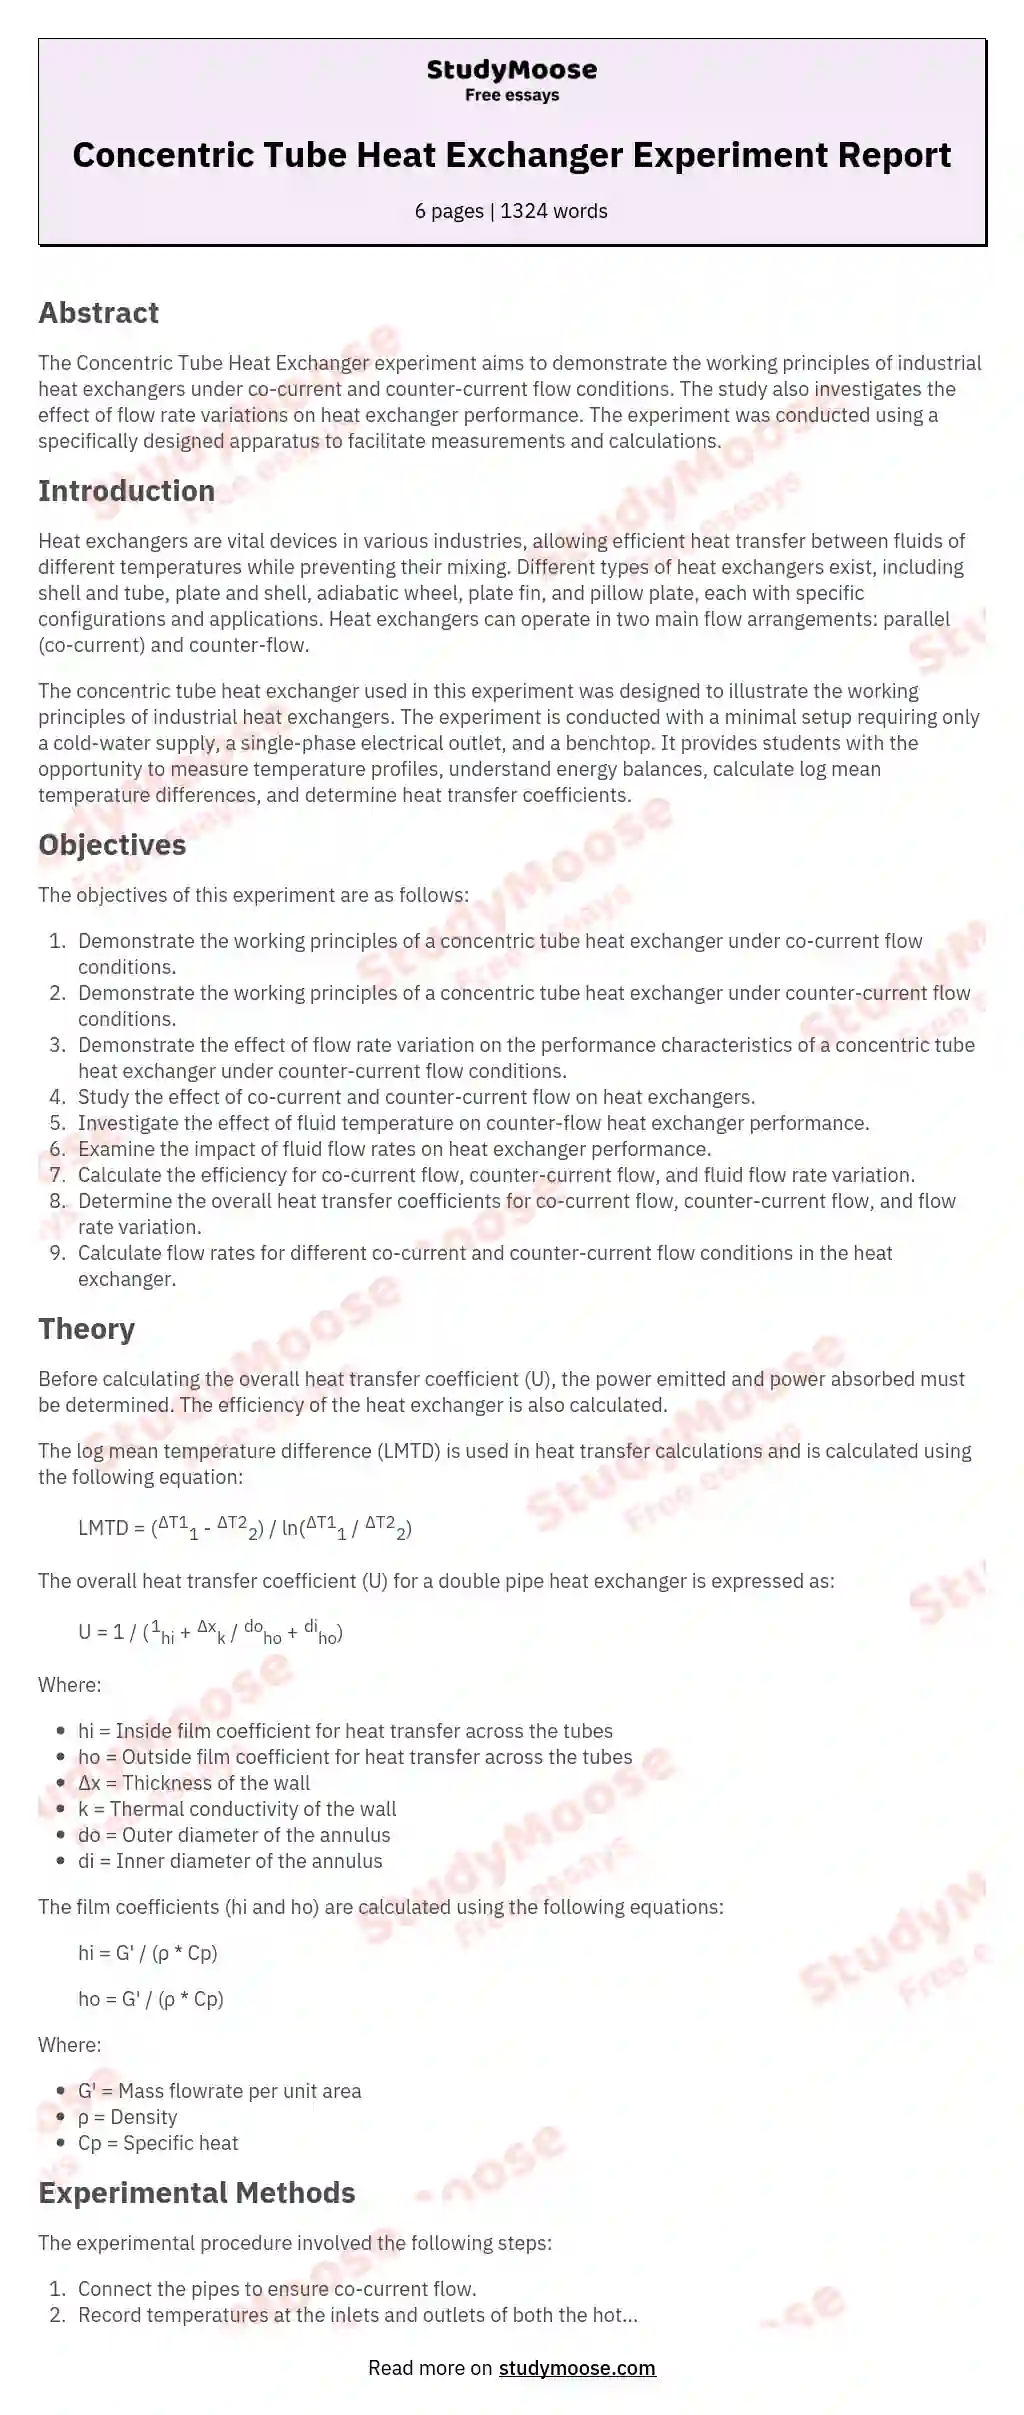 Concentric Tube Heat Exchanger Experiment Report essay